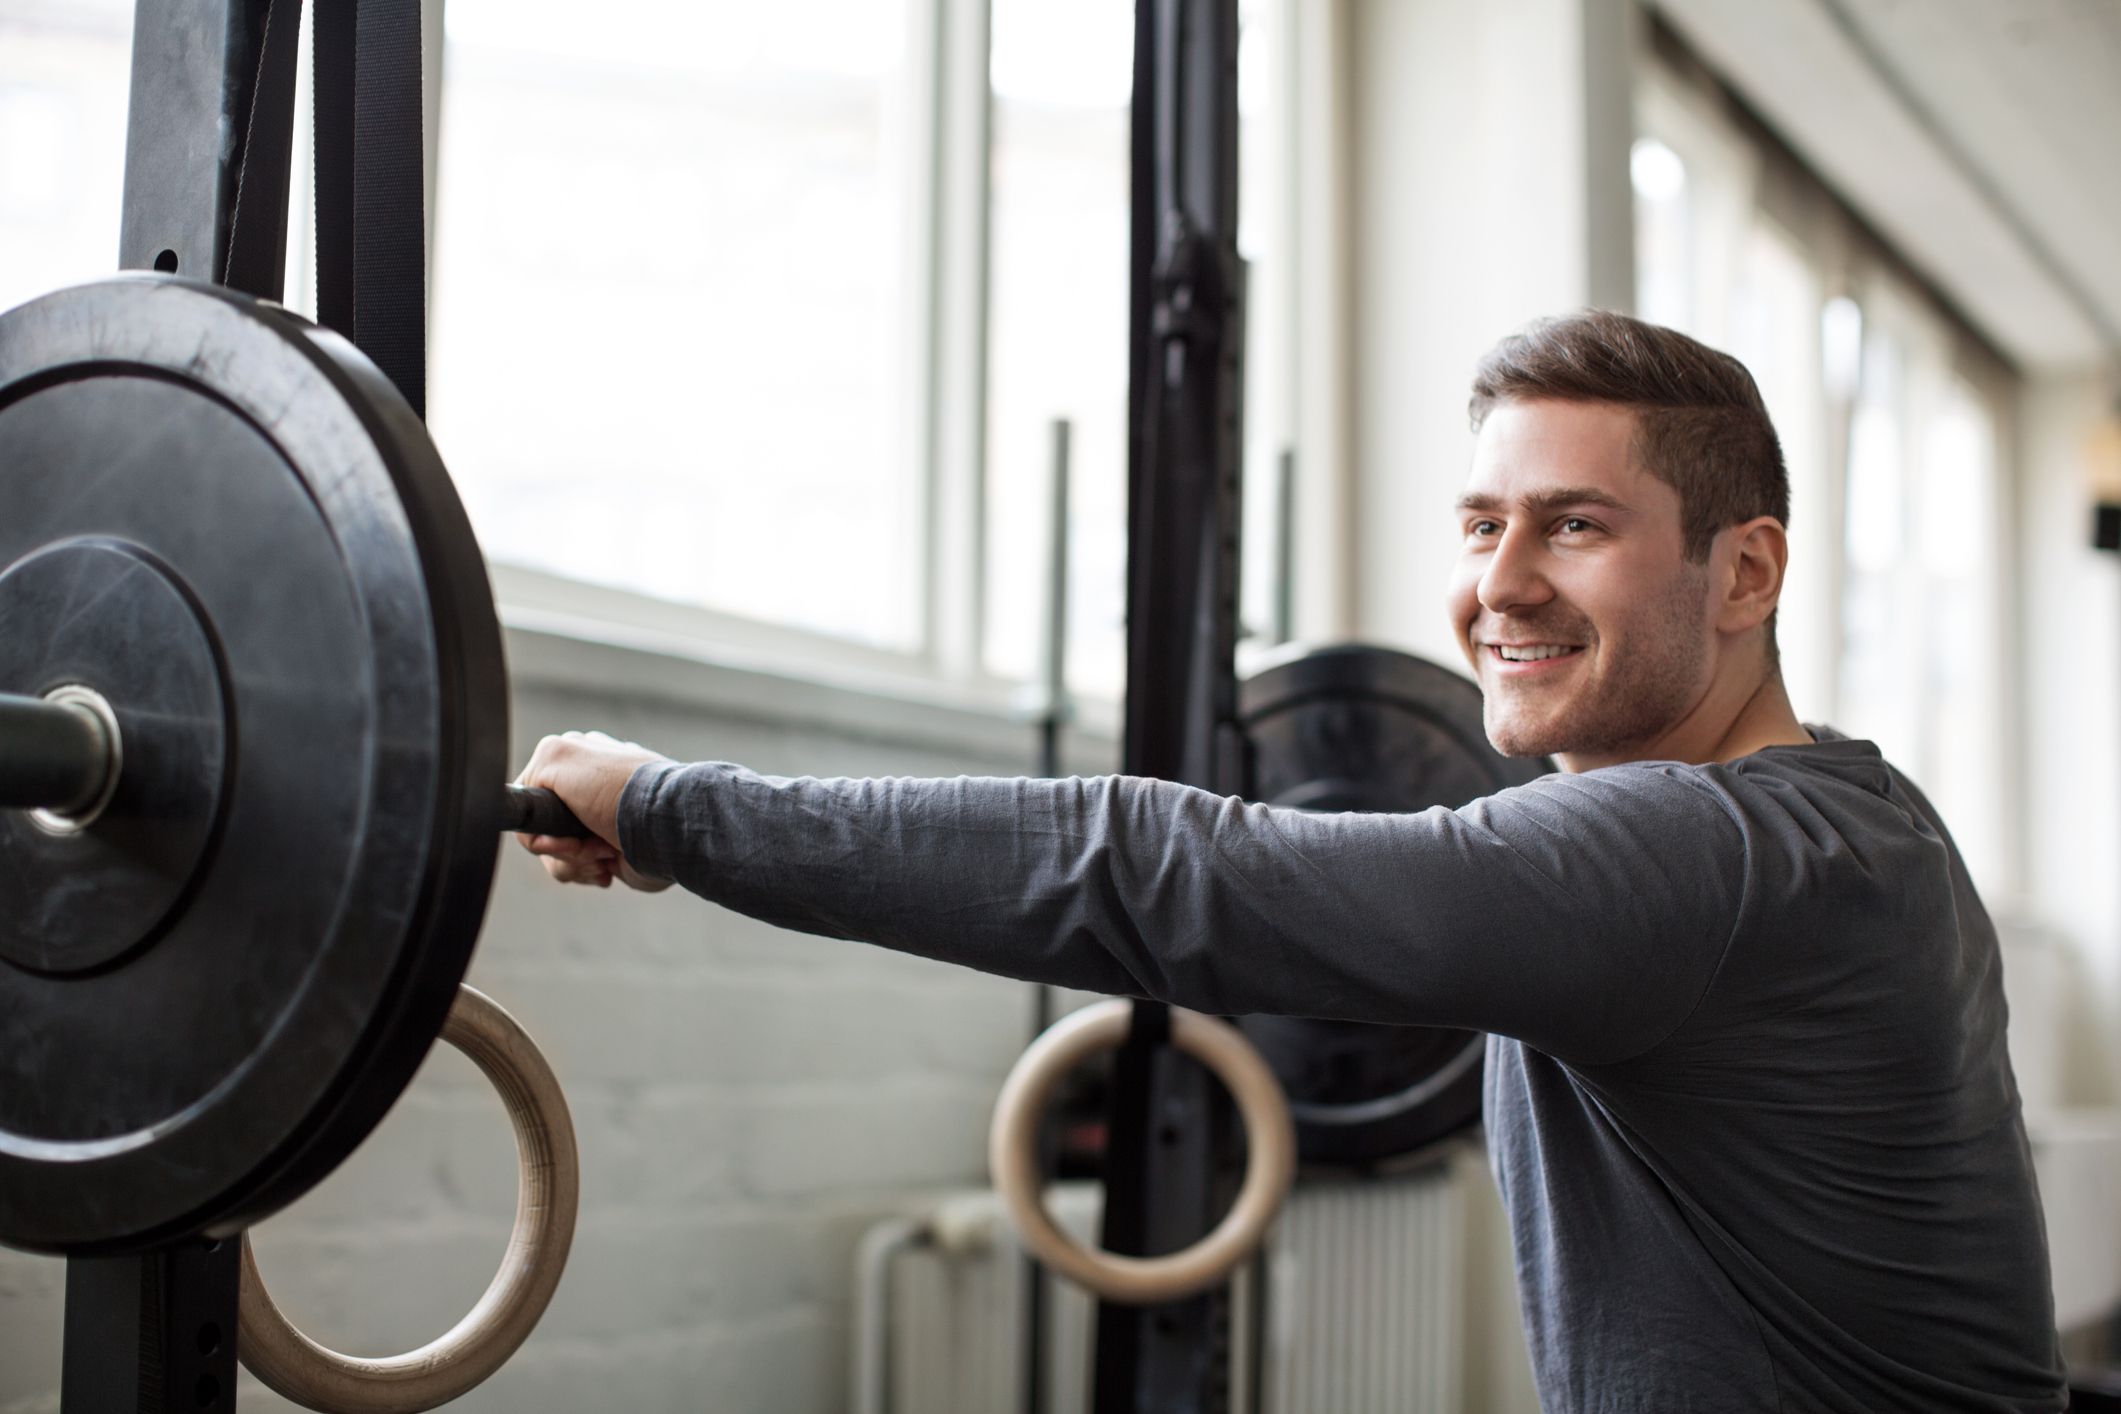 YMCA Lifewise Gym, Bournemouth - Training tips for your chest! ADDUCTION -  Your presses will only get you so far, ADD in more adduction to maximally  work the chest. The chest adducts